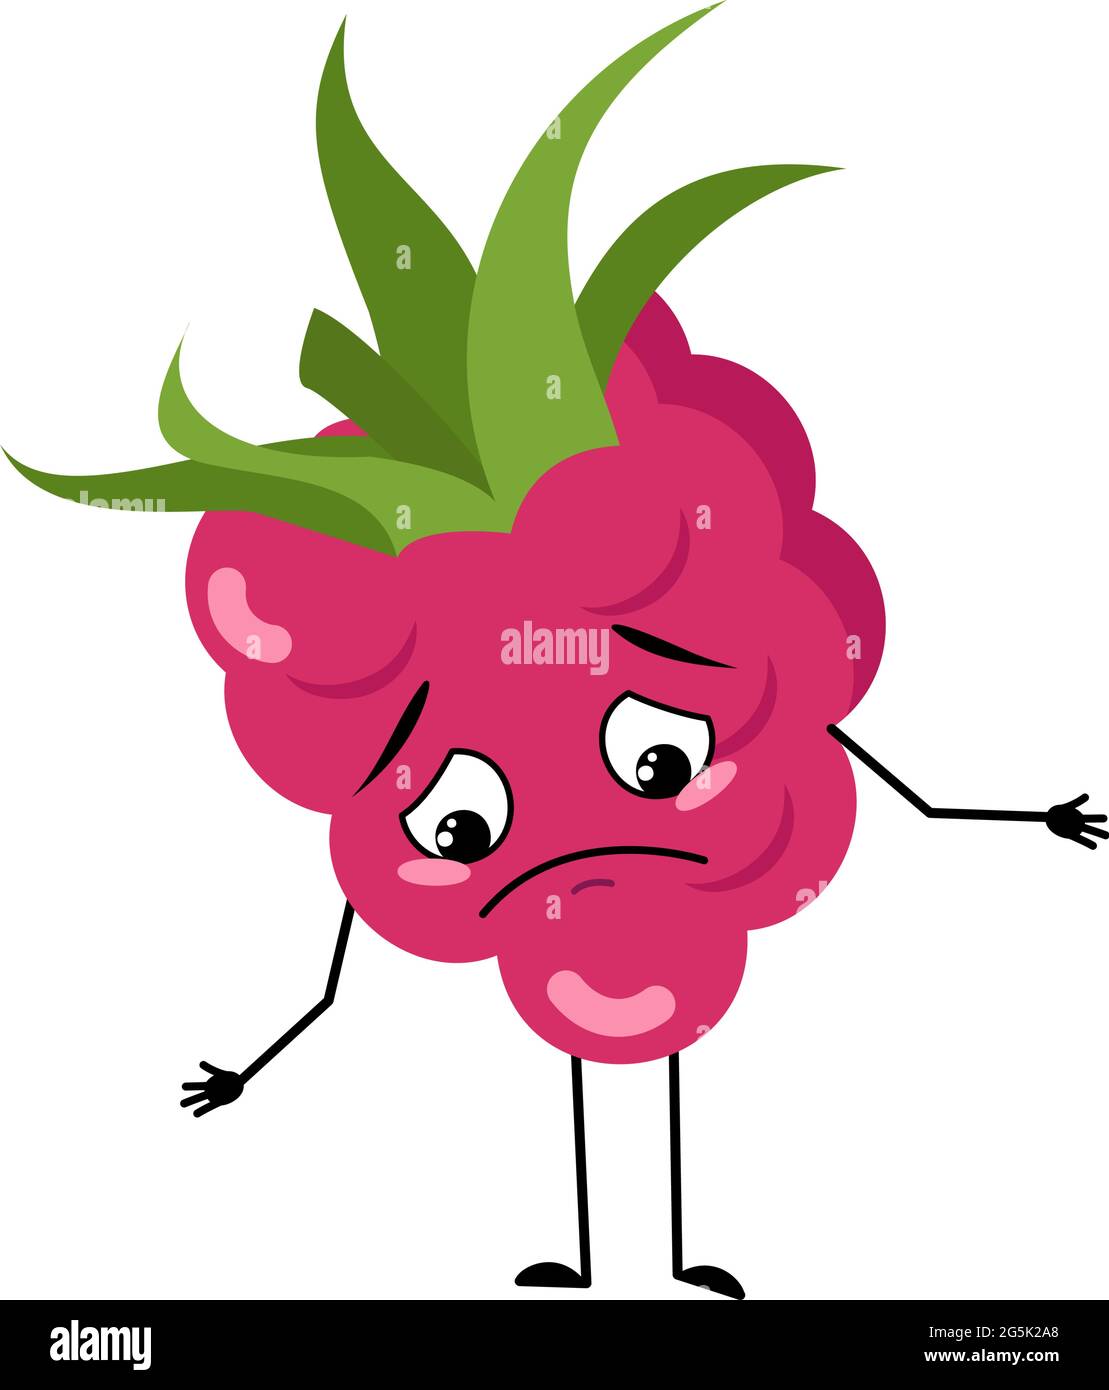 Cute raspberry character with sad emotions, downcast eyes, depressing face, arms and legs Stock Vector